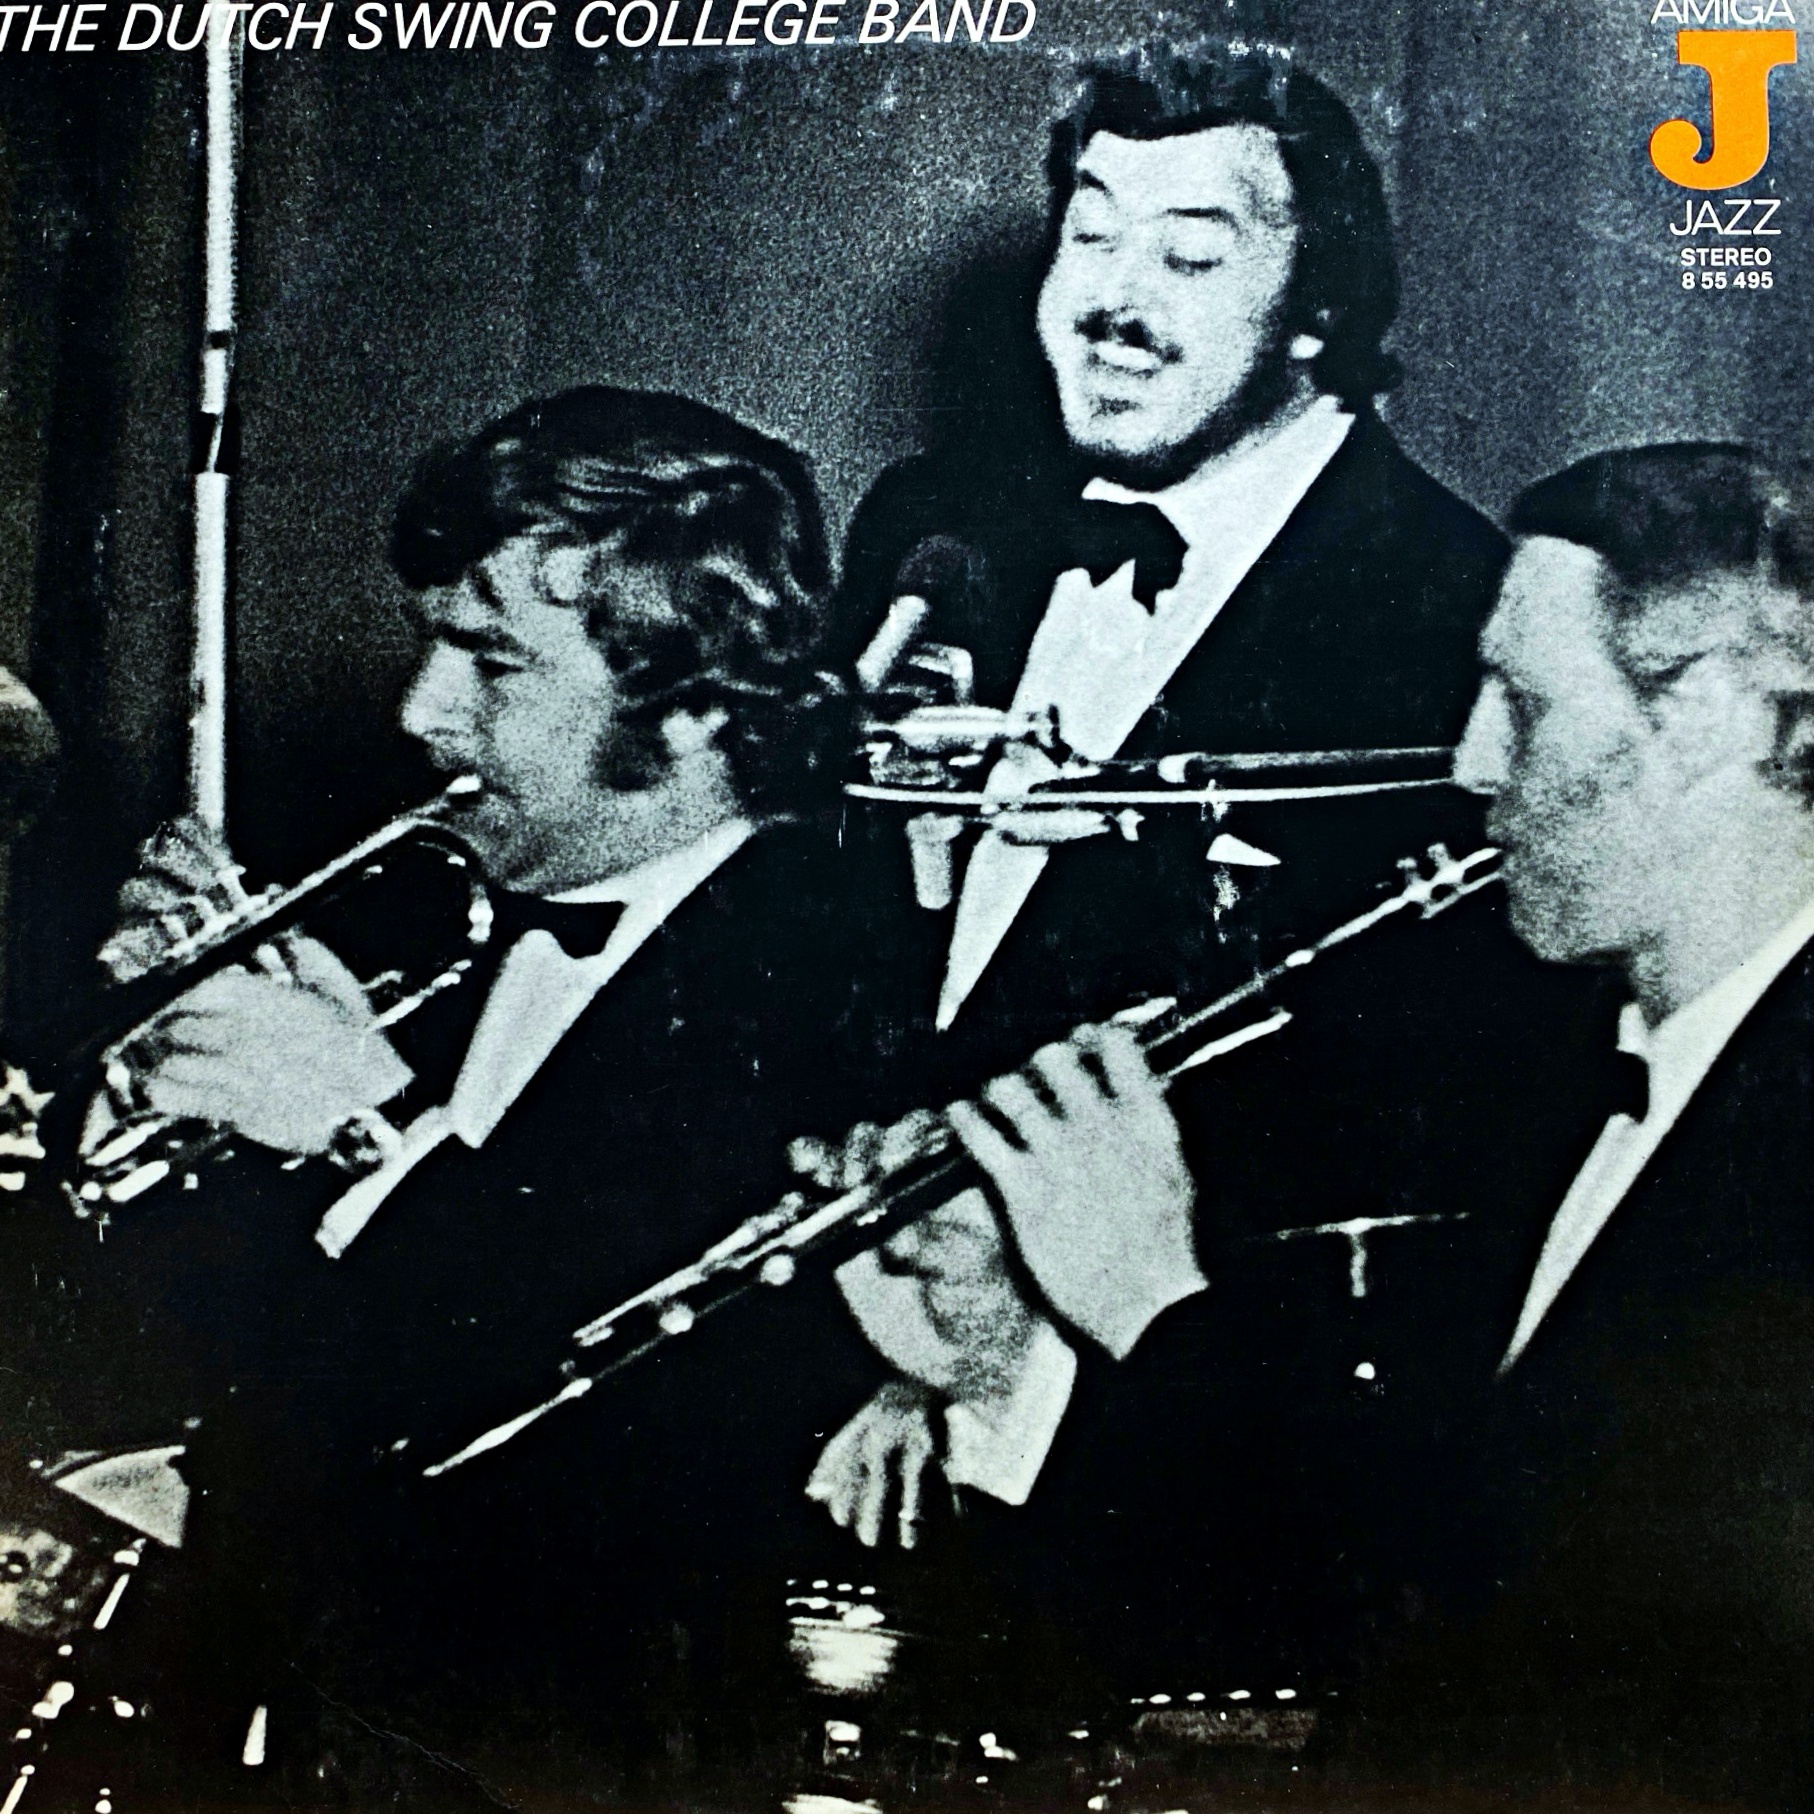 LP The Dutch Swing College Band – Dutch Swing College Band